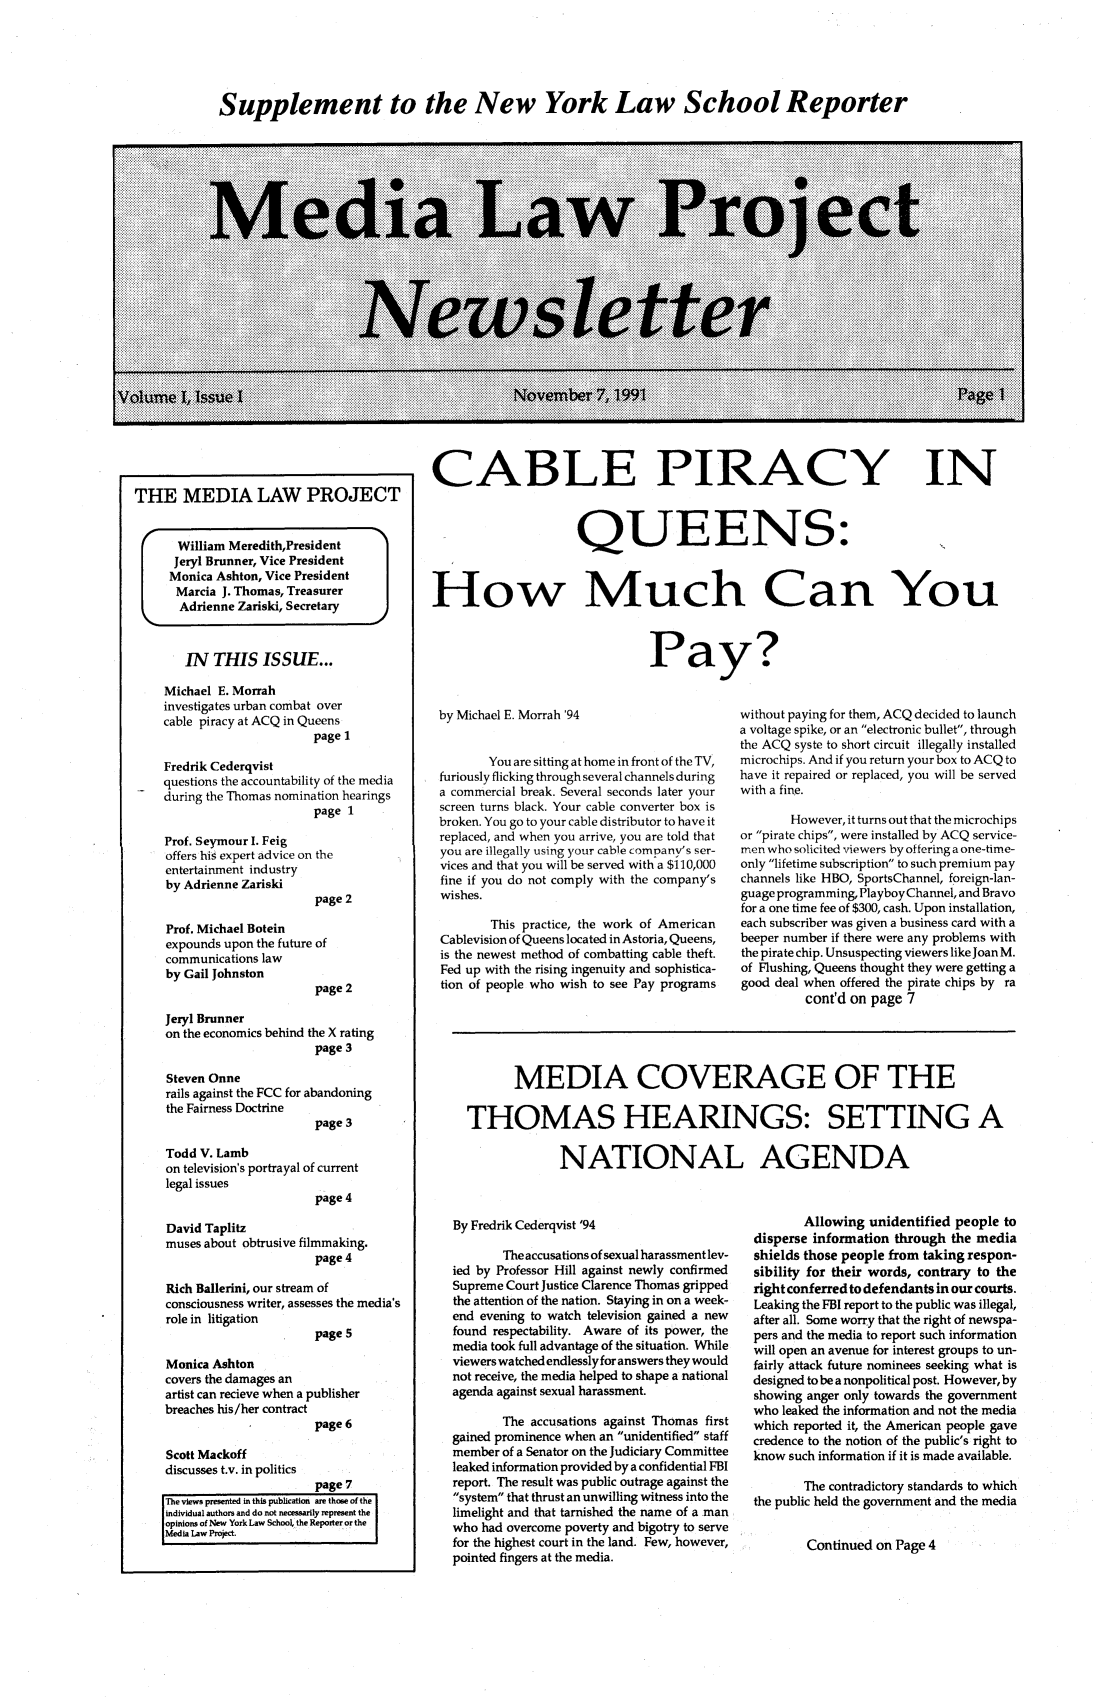 handle is hein.journals/medilpoy1 and id is 1 raw text is: Supplement to the New York Law School Reporter

THE MEDIA LAW PROJECT
I    William MeredithPresident
Jeryl Brunner, Vice President
Monica Ashton, Vice President
Marcia J. Thomas, Treasurer
Adrienne Zariski, Secretary
IN THIS ISSUE...
Michael E. Morrah
investigates urban combat over
cable piracy at ACQ in Queens
page 1
Fredrik Cederqvist
questions the accountability of the media
during the Thomas nomination hearings
page 1
Prof. Seymour I. Feig
offers his expert advice on the
entertainment industry
by Adrienne Zariski
page 2
Prof. Michael Botein
expounds upon the future of
communications law
by Gail Johnston
page 2

CABLE PIRACY IN
QUEENS:
How Much Can You

Pay?

by Michael E. Morrah '94
You are sitting at home in front of the TV,
furiously flicking through several channels during
a commercial break. Several seconds later your
screen turns black. Your cable converter box is
broken. You go to your cable distributor to have it
replaced, and when you arrive, you are told that
you are illegally using your cable company's ser-
vices and that you will be served with a $110,000
fine if you do not comply with the company's
wishes.
This practice, the work of American
Cablevision of Queens located in Astoria, Queens,
is the newest method of combatting cable theft.
Fed up with the rising ingenuity and sophistica-
tion of people who wish to see Pay programs

without paying for them, ACQ decided to launch
a voltage spike, or an electronic bullet, through
the ACQ syste to short circuit illegally installed
microchips. And if you return your box to ACQ to
have it repaired or replaced, you will be served
with a fine.
However, it turns out that the microchips
or pirate chips, were installed by ACQ service-
men who solicited viewers by offering a one-time-
only lifetime subscription to such premium pay
channels like HBO, SportsChannel, foreign-lan-
guage programming, PlayboyChannel, and Bravo
for a one time fee of $300, cash. Upon installation,
each subscriber was given a business card with a
beeper number if there were any problems with
the pirate chip. Unsuspecting viewers like Joan M.
of Flushing, Queens thought they were getting a
good deal when offered the pirate chips by ra
cont'd on page 7

Jeryl Brunner
on the economics behind the X rating
page 3
Steven Onne
rails against the FCC for abandoning
the Fairness Doctrine
page 3
Todd V. Lamb
on television's portrayal of current
legal issues
page 4

MEDIA COVERAGE OF THE
THOMAS HEARINGS: SETTING A
NATIONAL AGENDA

David Taplitz
muses about obtrusive filmmaking.
page 4
Rich Ballerini, our stream of
consciousness writer, assesses the media's
role in litigation
page 5
Monica Ashton
covers the damages an
artist can recieve when a publisher
breaches his/her contract
page 6
Scott Mackoff
discusses t.v. in politics
page 7
The views presented in this publication are those of the
individual authors and do not necessarily represent the
opinions of New York Law School, the Reporter or the
Media Law Project.

By Fredrik Cederqvist '94
The accusations of sexual harassment lev-
ied by Professor Hill against newly confirmed
Supreme Court Justice Clarence Thomas gripped
the attention of the nation. Staying in on a week-
end evening to watch television gained a new
found respectability. Aware of its power, the
media took full advantage of the situation. While
viewers watched endlesslyfor answers they would
not receive, the media helped to shape a national
agenda against sexual harassment.
The accusations against Thomas first
gained prominence when an unidentified staff
member of a Senator on the Judiciary Committee
leaked information provided by a confidential FBI
report. The result was public outrage against the
system that thrust an unwilling witness into the
limelight and that tarnished the name of a man
who had overcome poverty and bigotry to serve
for the highest court in the land. Few, however,
pointed fingers at the media.

Allowing unidentified people to
disperse information through the media
shields those people from taking respon-
sibility for their words, contrary to the
right conferred to defendants in our courts.
Leaking the FBI report to the public was illegal,
after all. Some worry that the right of newspa-
pers and the media to report such information
will open an avenue for interest groups to un-
fairly attack future nominees seeking what is
designed to be a nonpolitical post. However, by
showing anger only towards the government
who leaked the information and not the media
which reported it, the American people gave
credence to the notion of the public's right to
know such information if it is made available.
The contradictory standards to which
the public held the government and the media
Continued on Page 4


